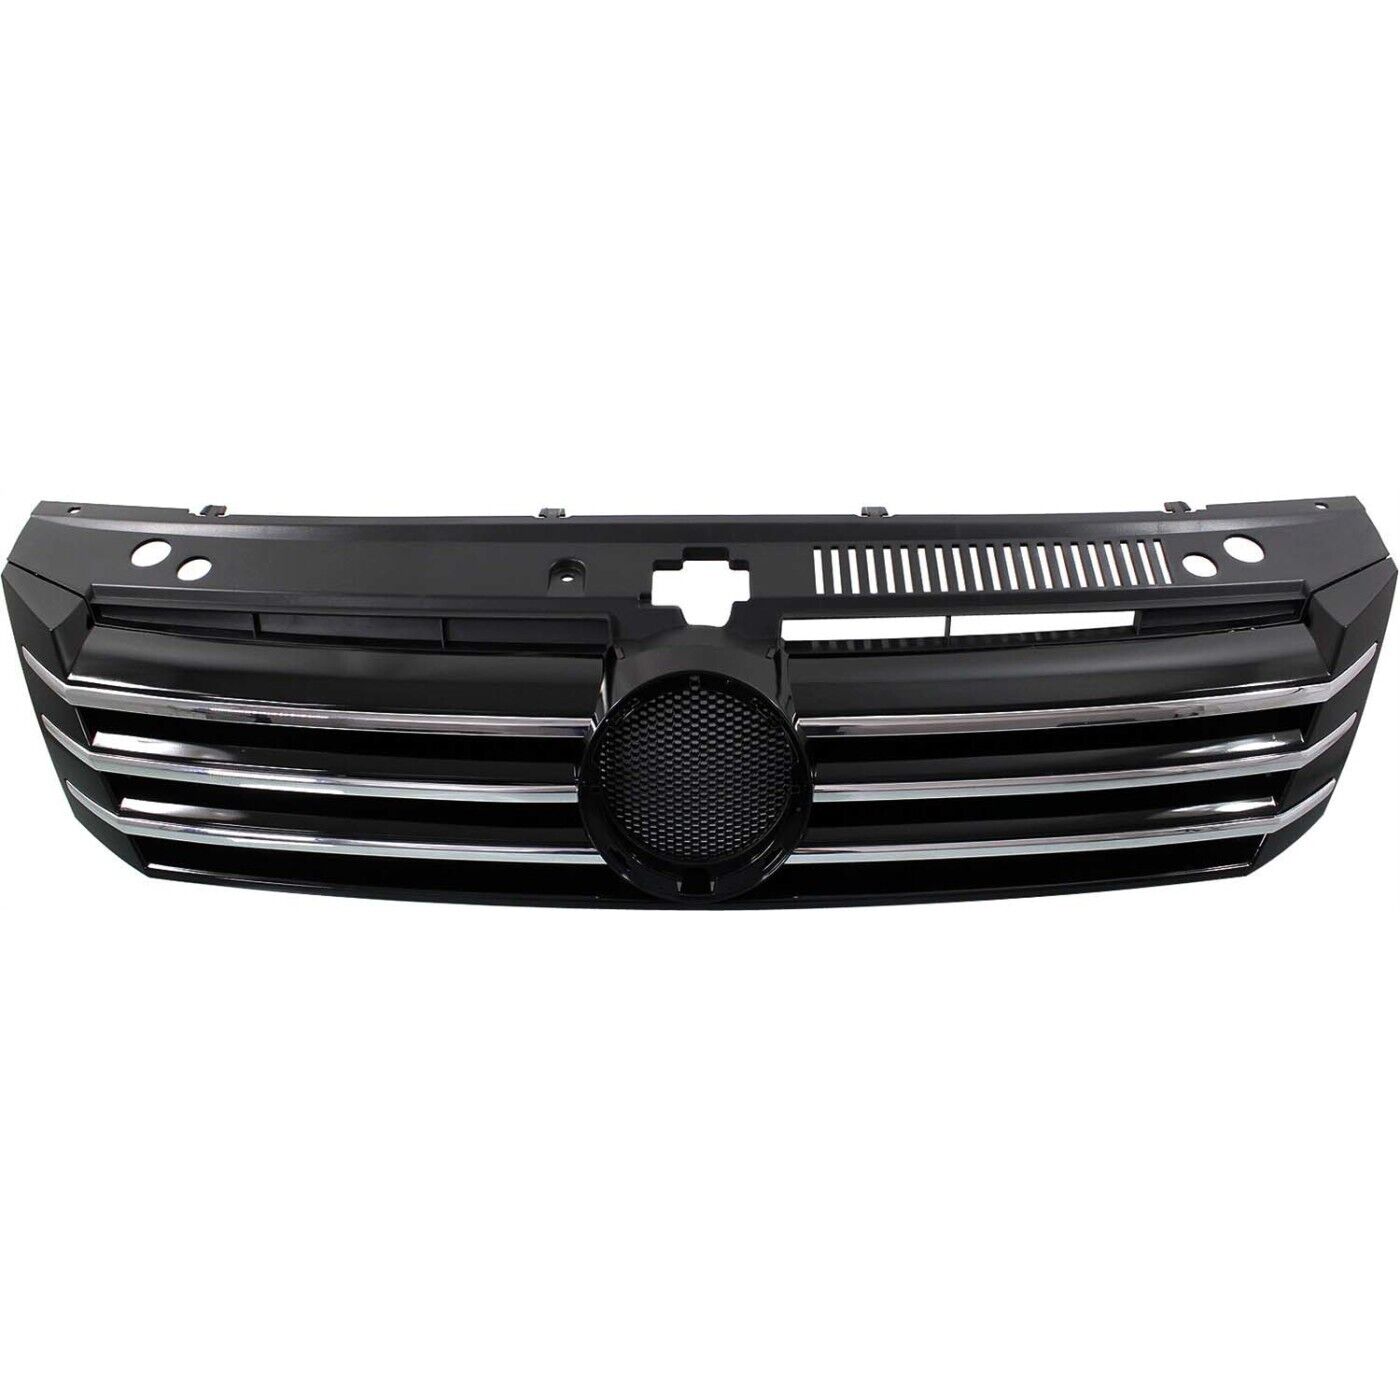 Grille For 2012 2013 2014 2015 Volkswagen Passat Painted Black Shell and Insert